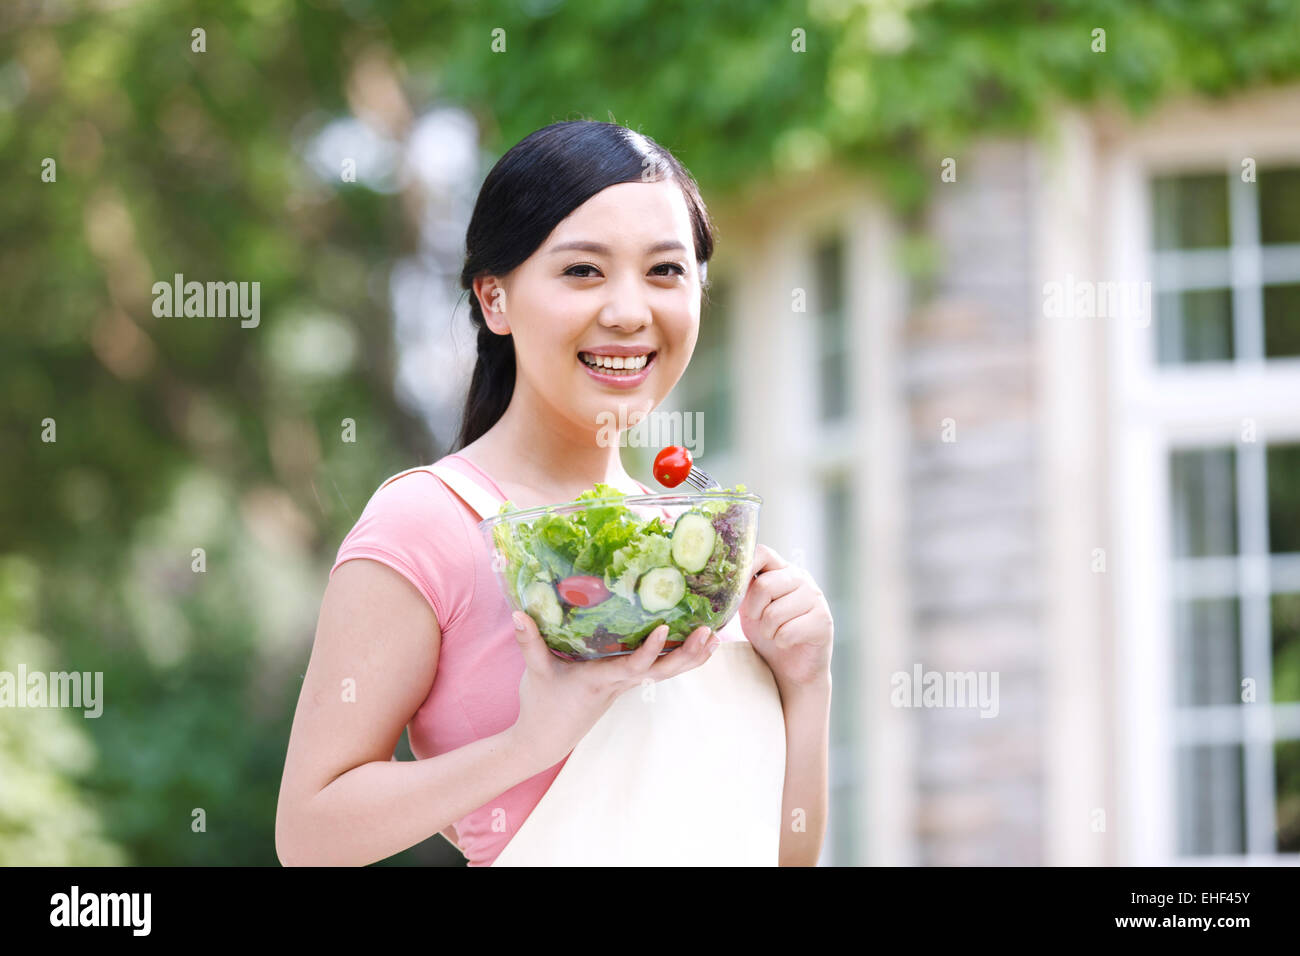 Oriental woman outdoors with vegetable salad Stock Photo